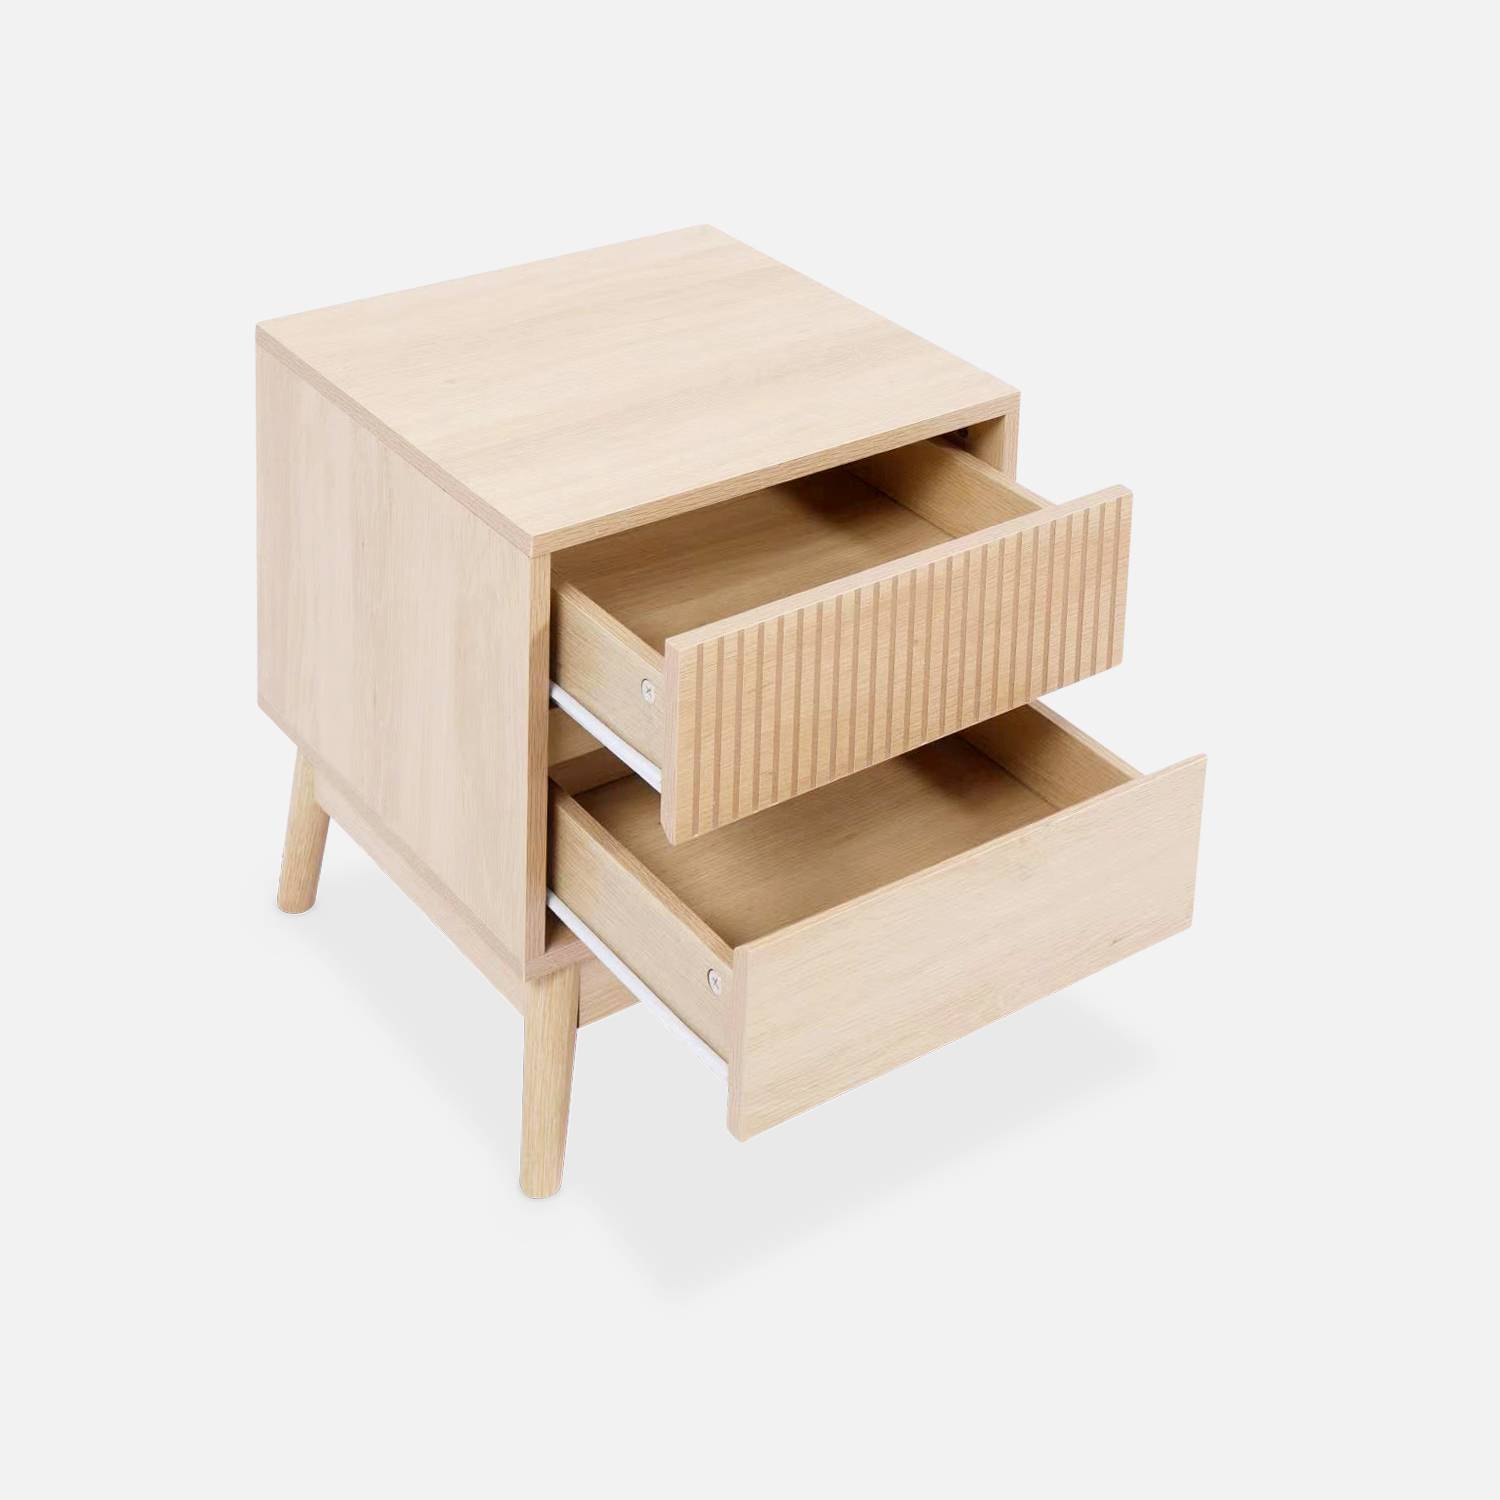 Grooved wooden bedside table with 2 drawers, 40x39x48cm, Linear - Natural Wood colour,sweeek,Photo4